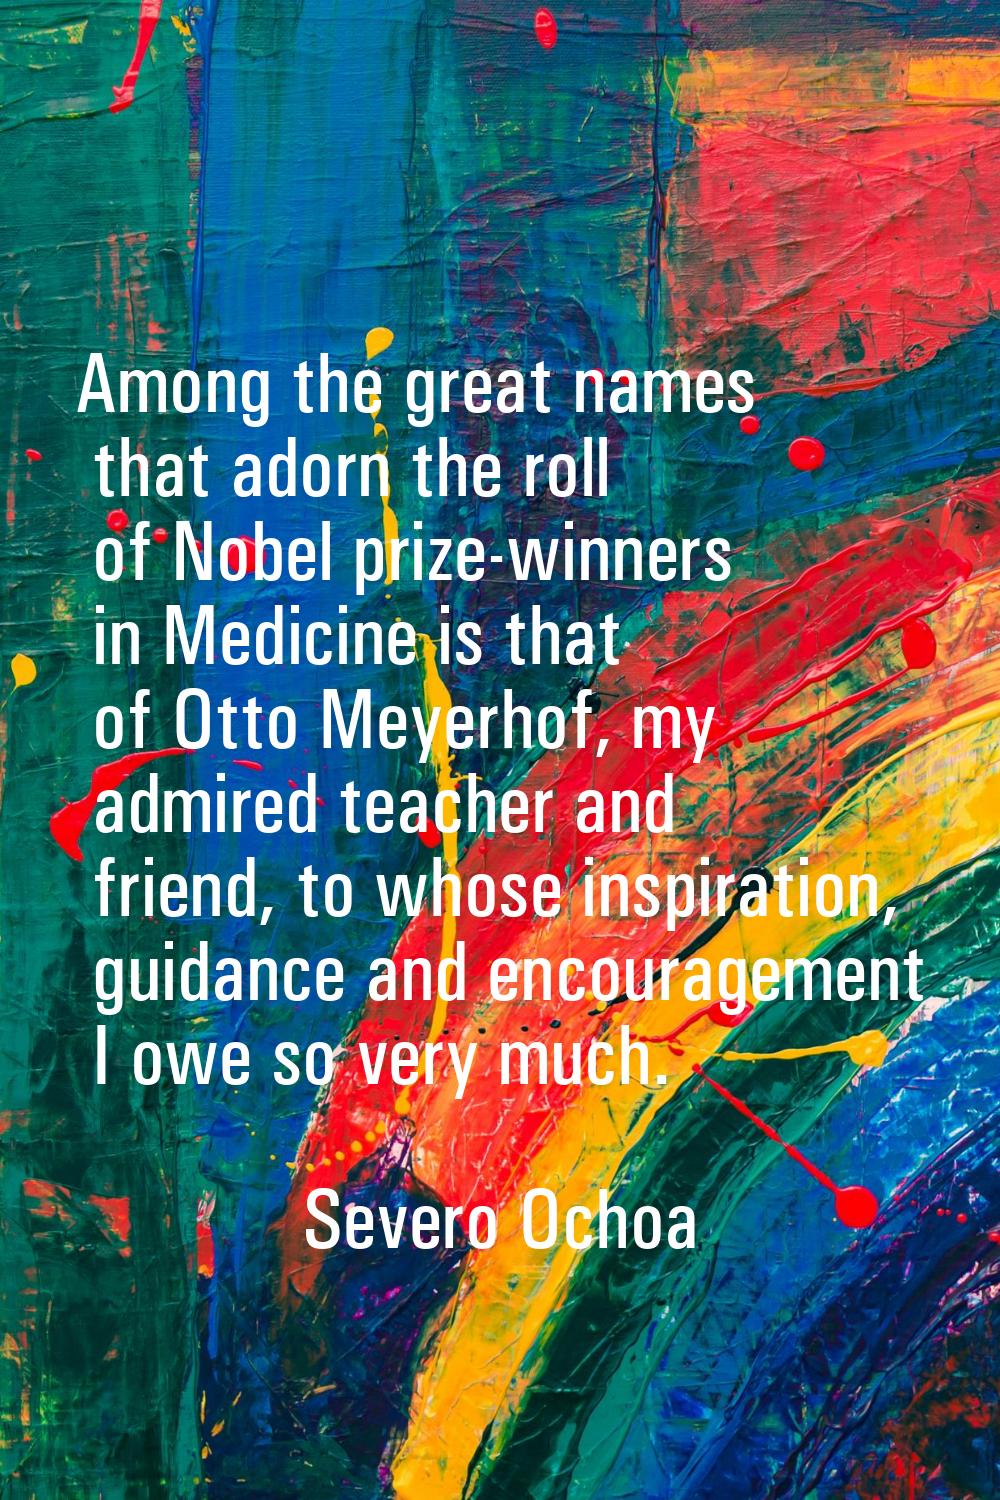 Among the great names that adorn the roll of Nobel prize-winners in Medicine is that of Otto Meyerh